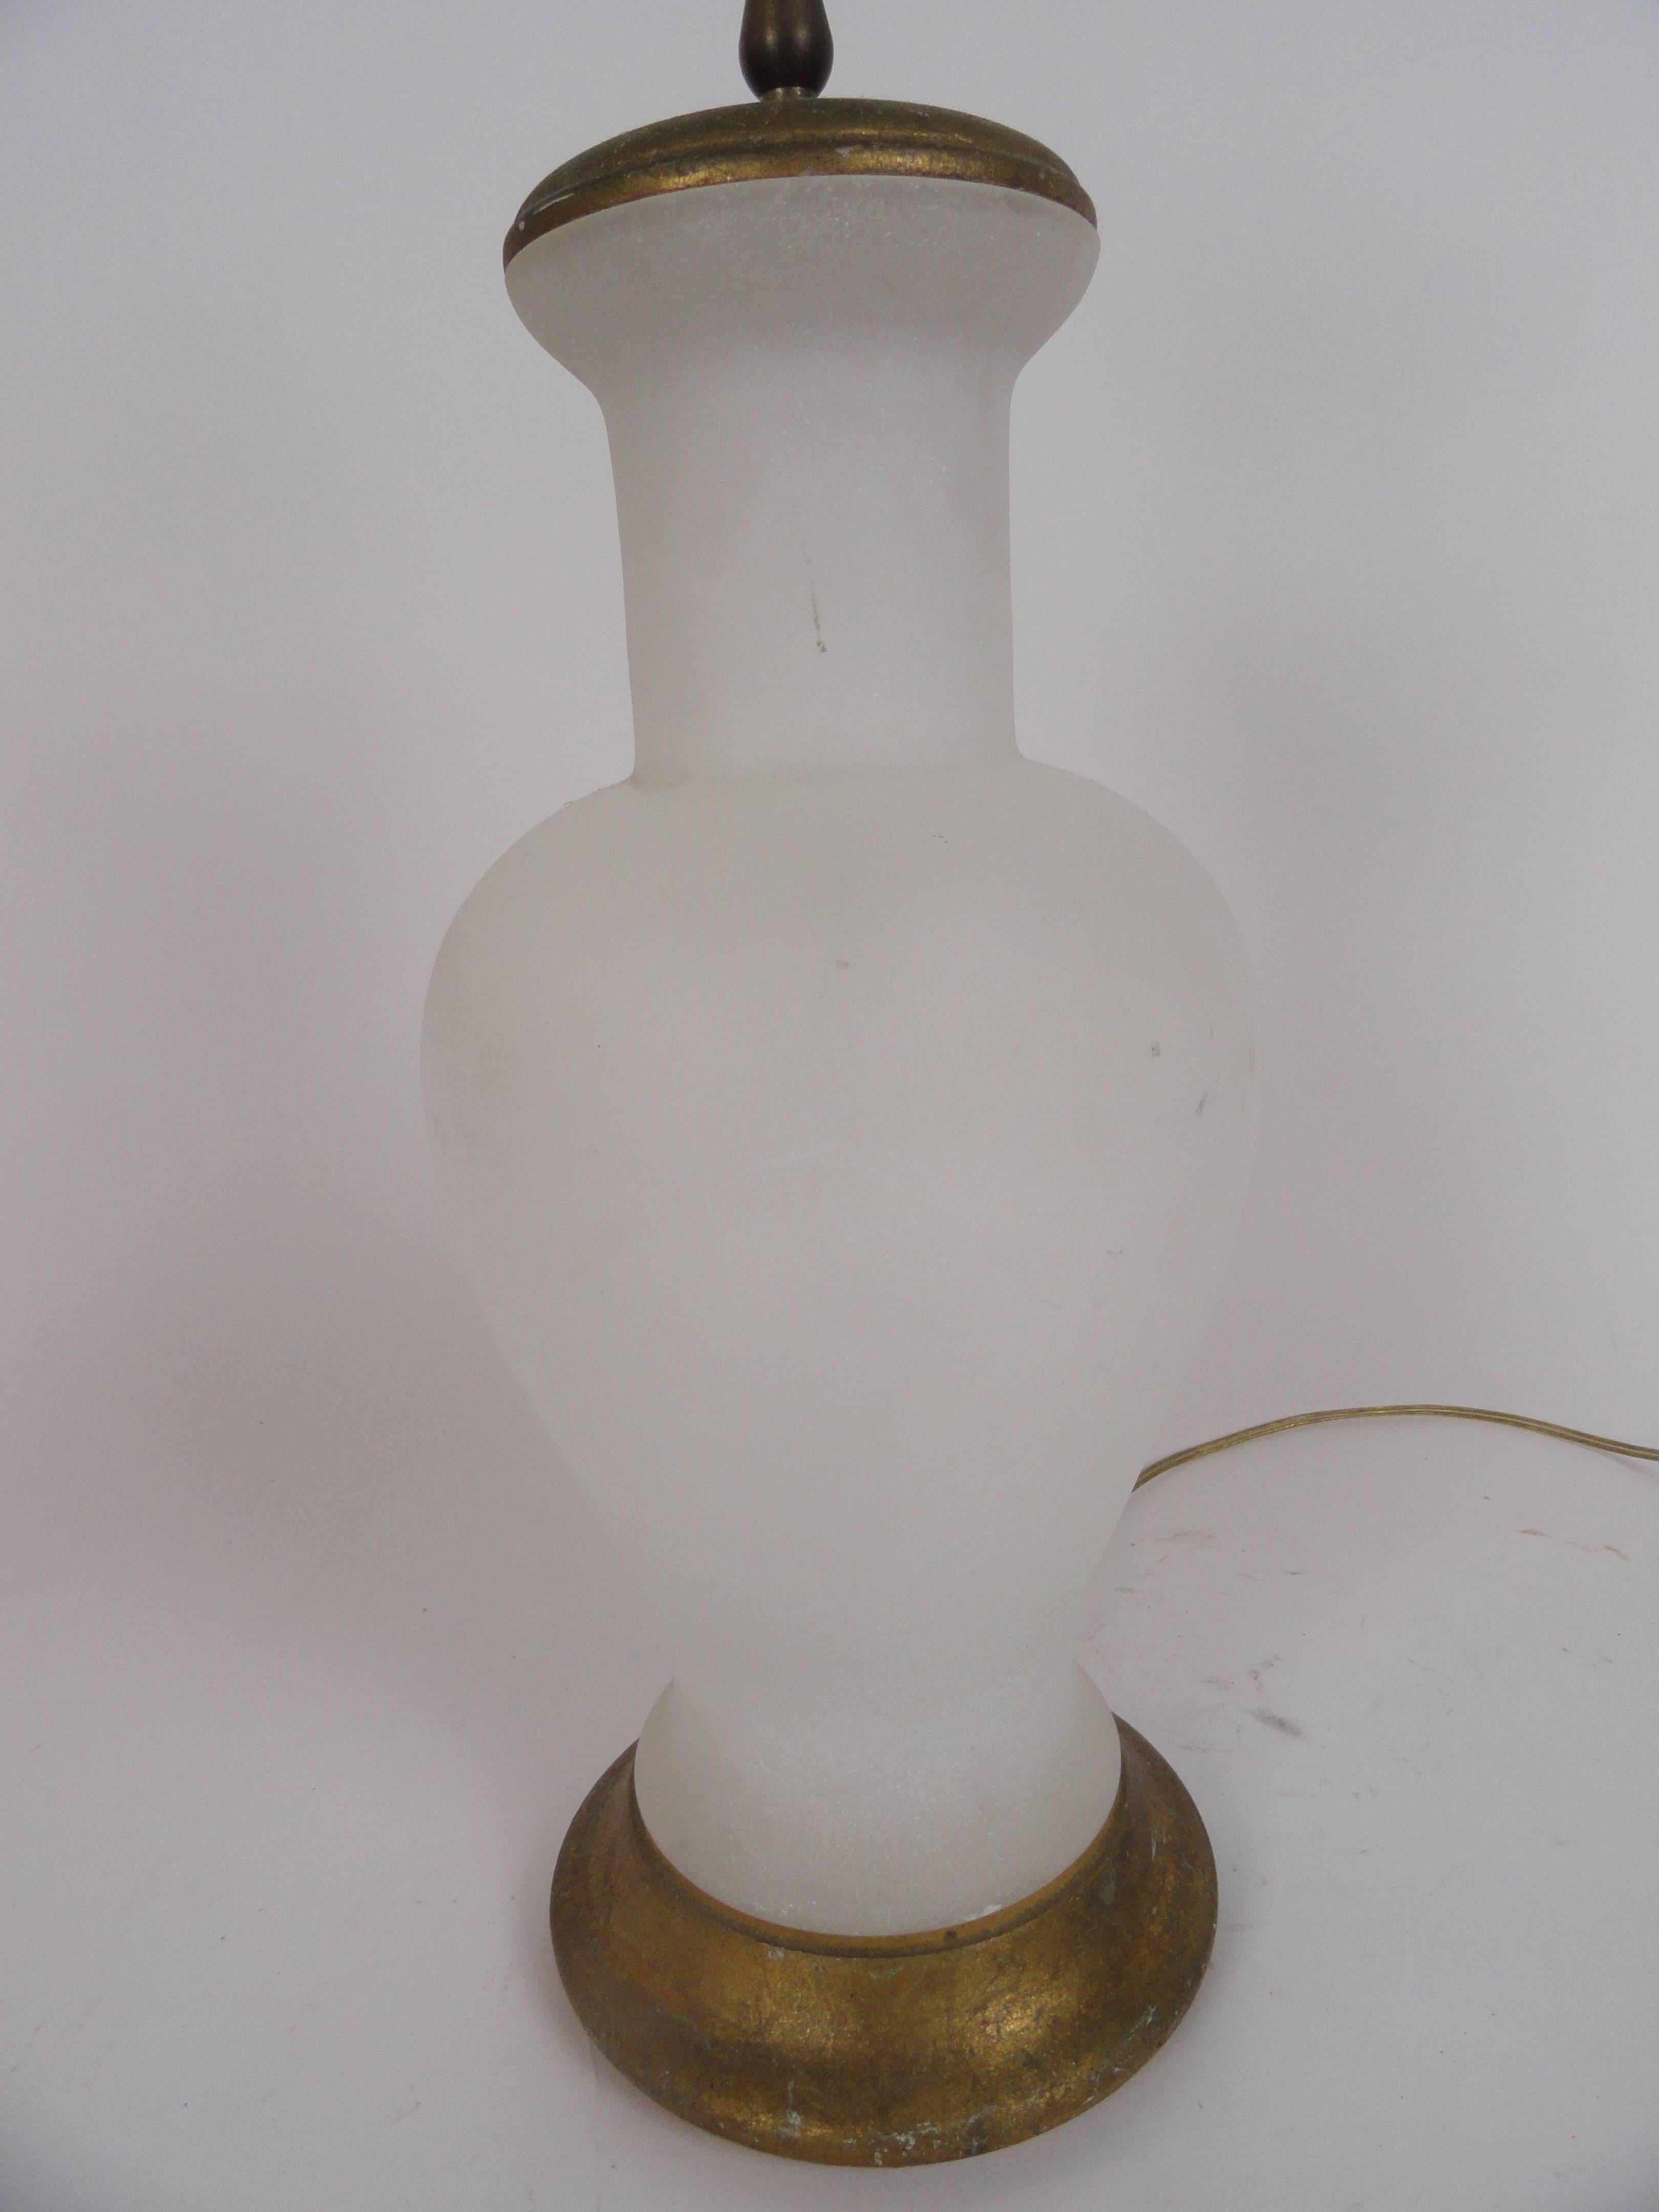 Italian frosted glass lamp from the 1970s. Gold leaf wood base.